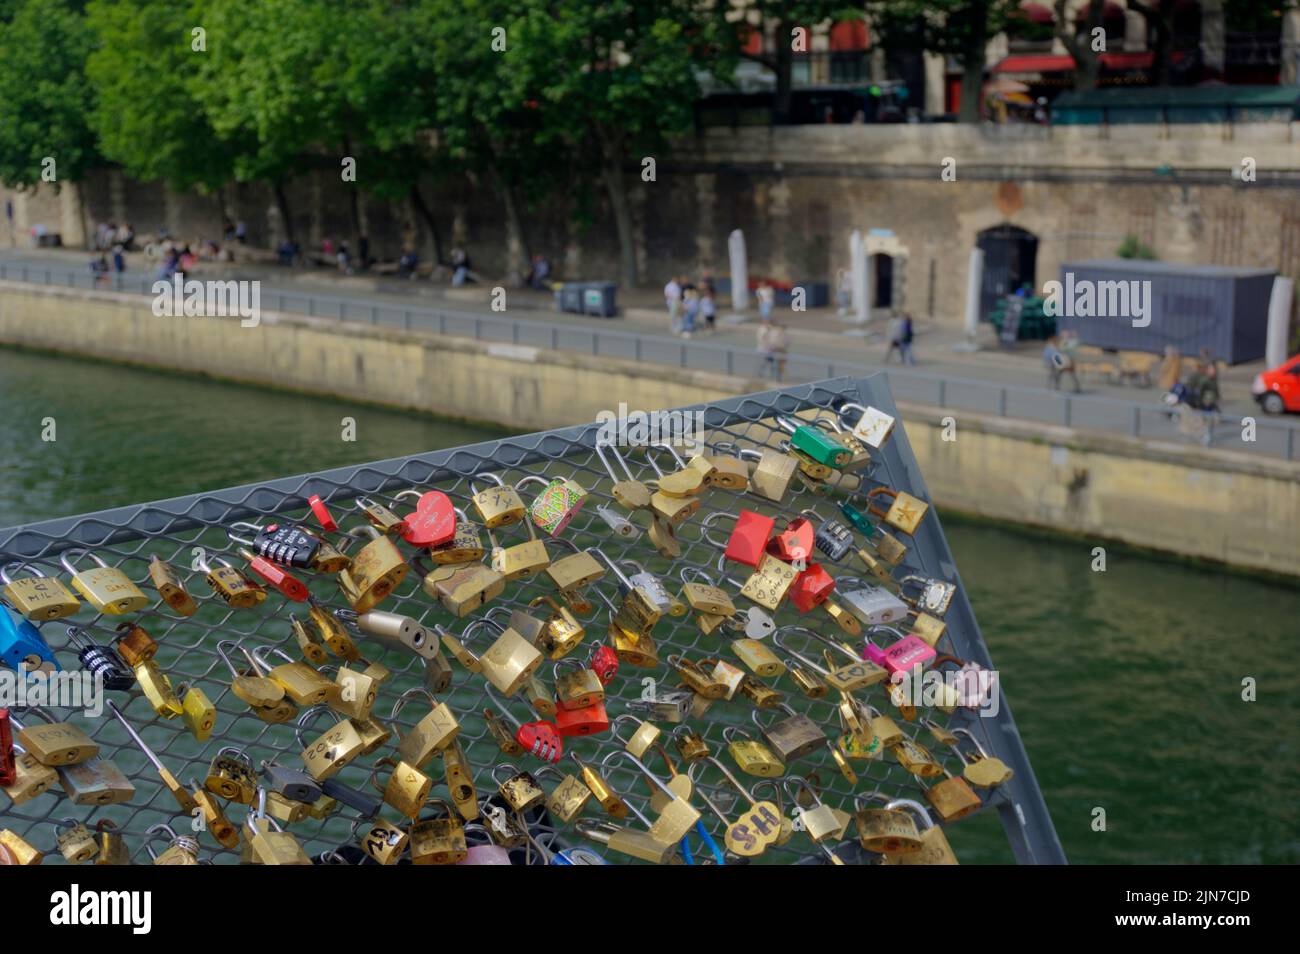 Paris, France - May 26, 2022: Padlocks signifying love attached to Pont au Change bridge over River Seine with riverbank blurred in background Stock Photo